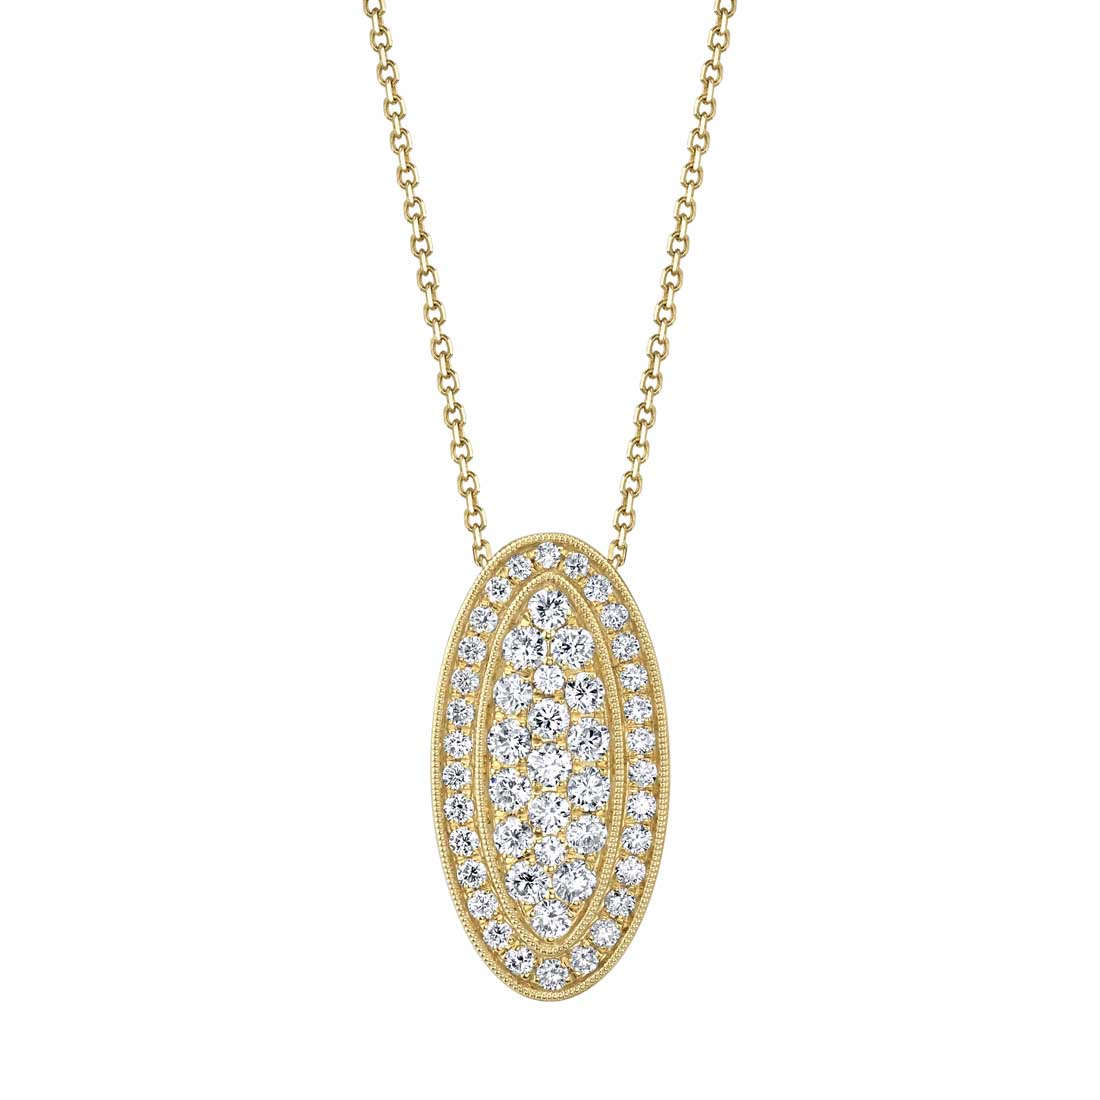 Oval Shaped Pendant in Yellow Gold